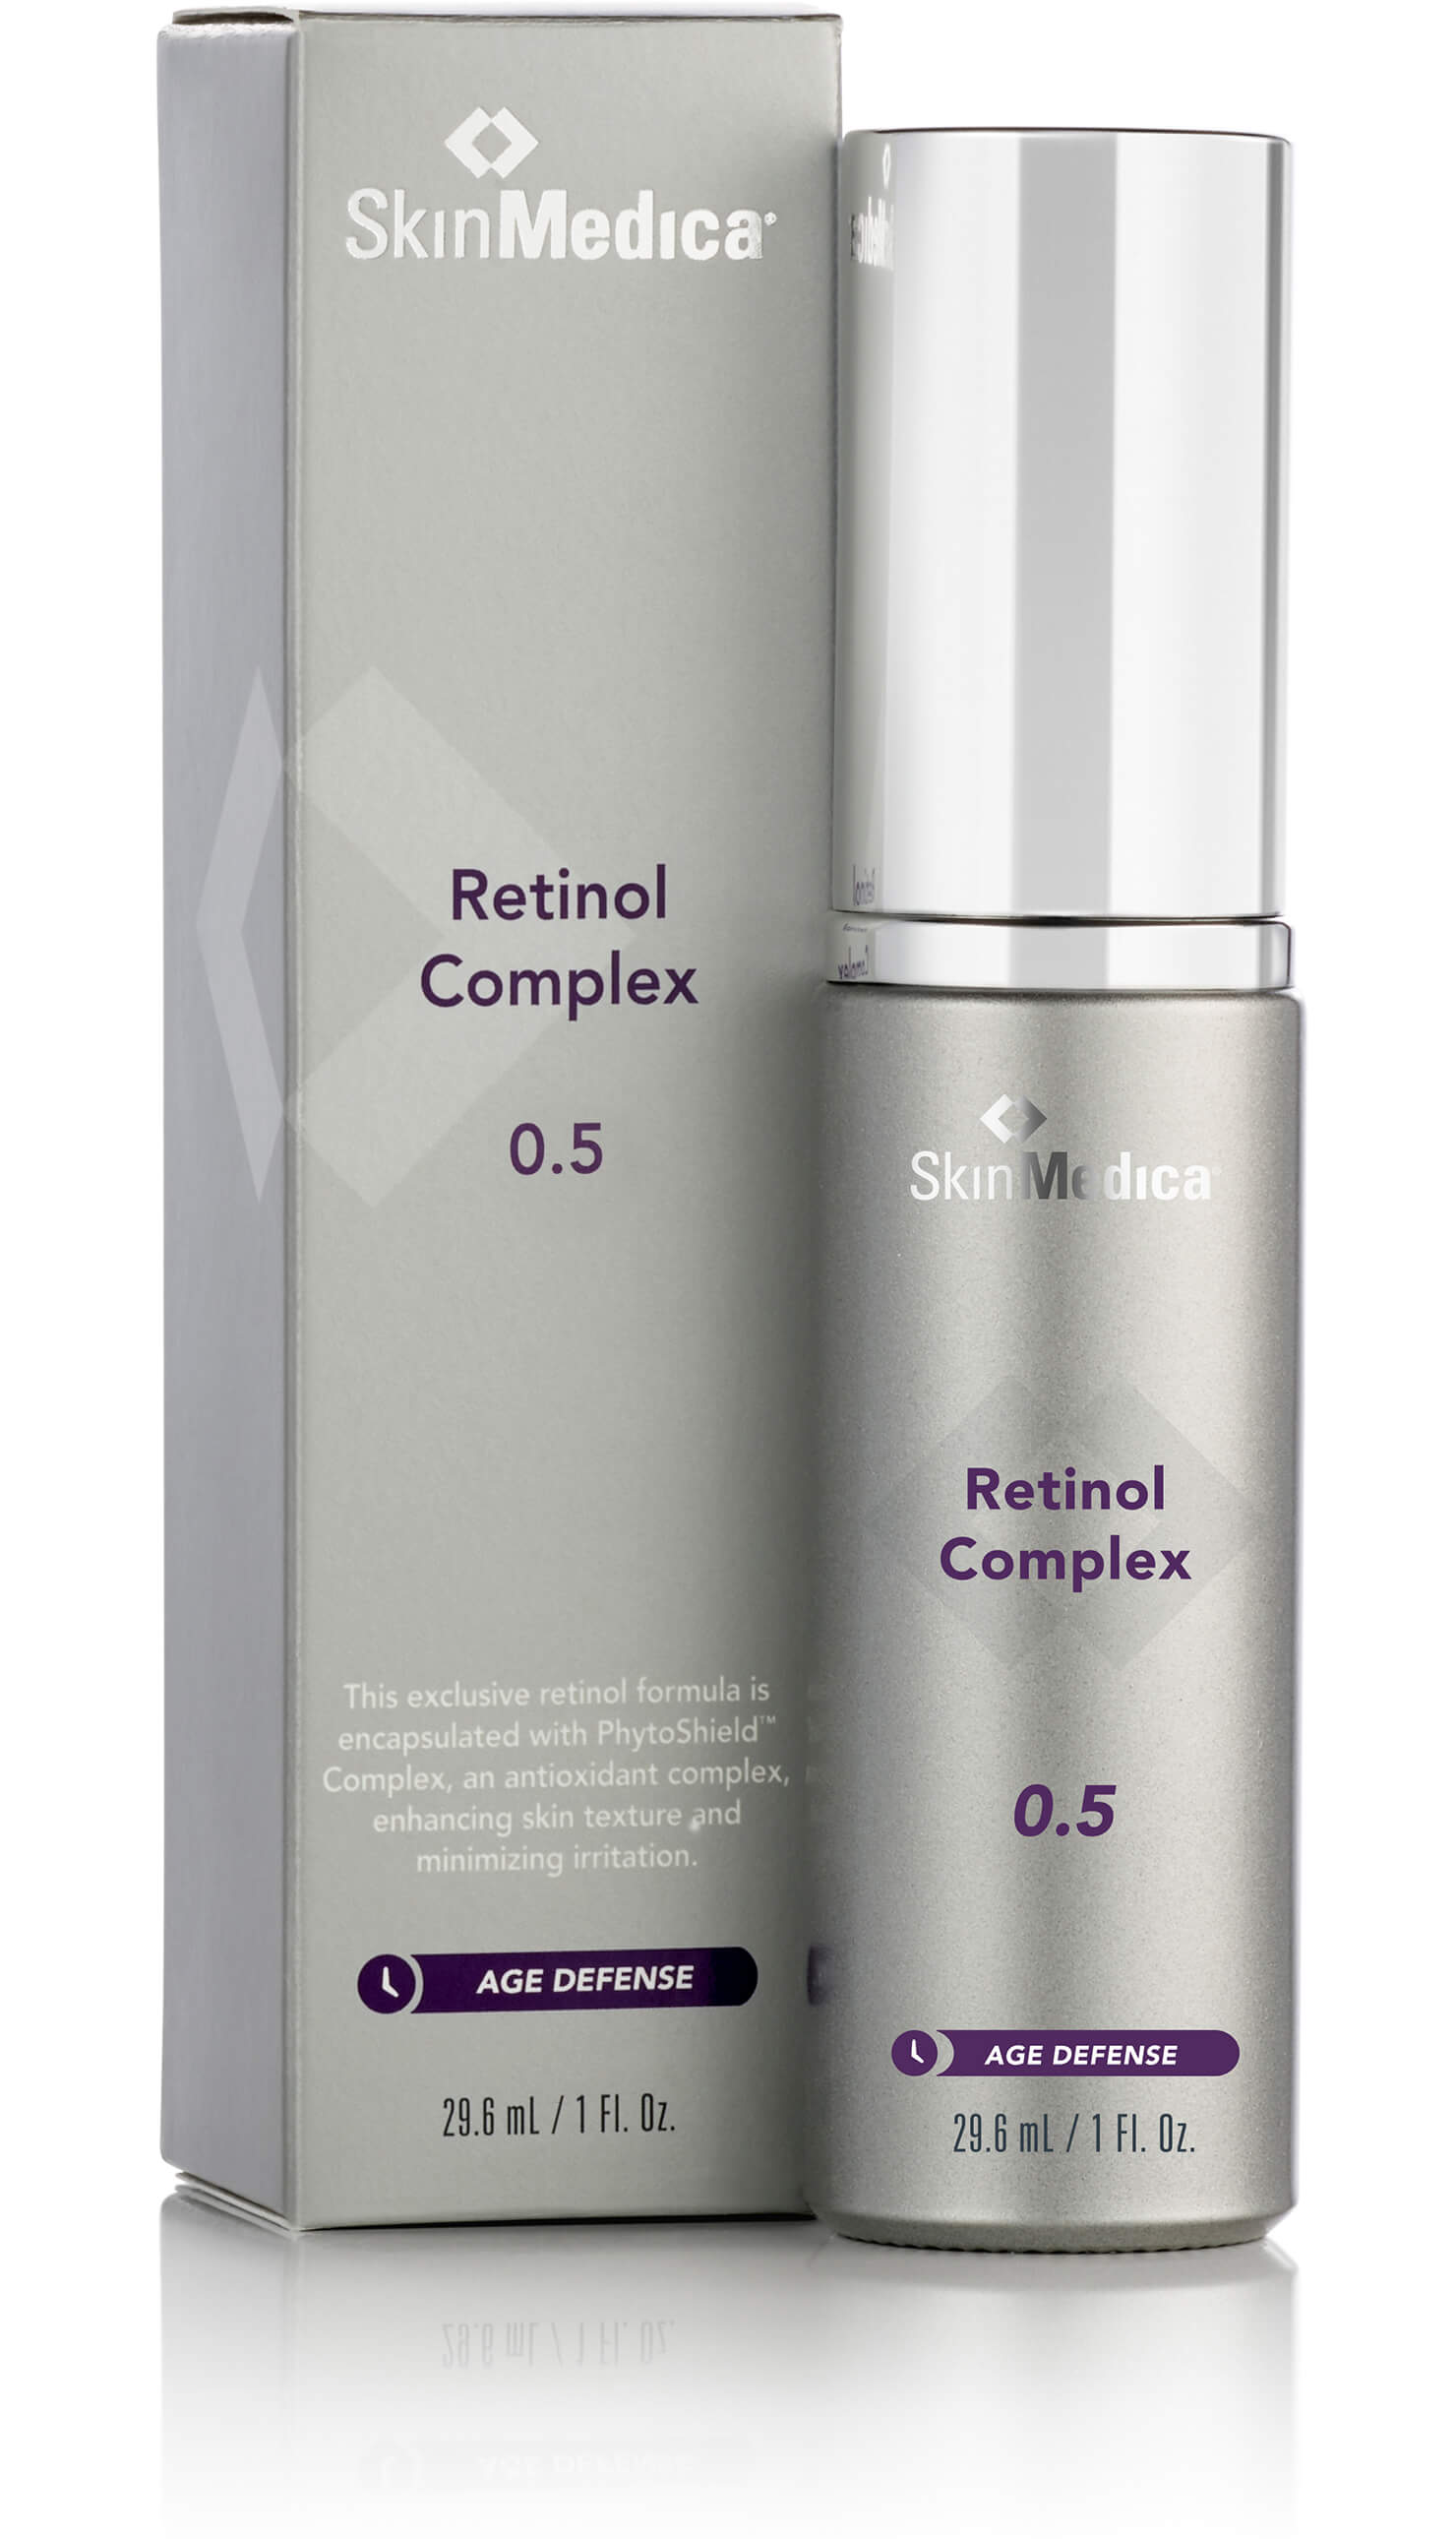 Retinol Complex by in 0.5%, | Buy Online in Canada